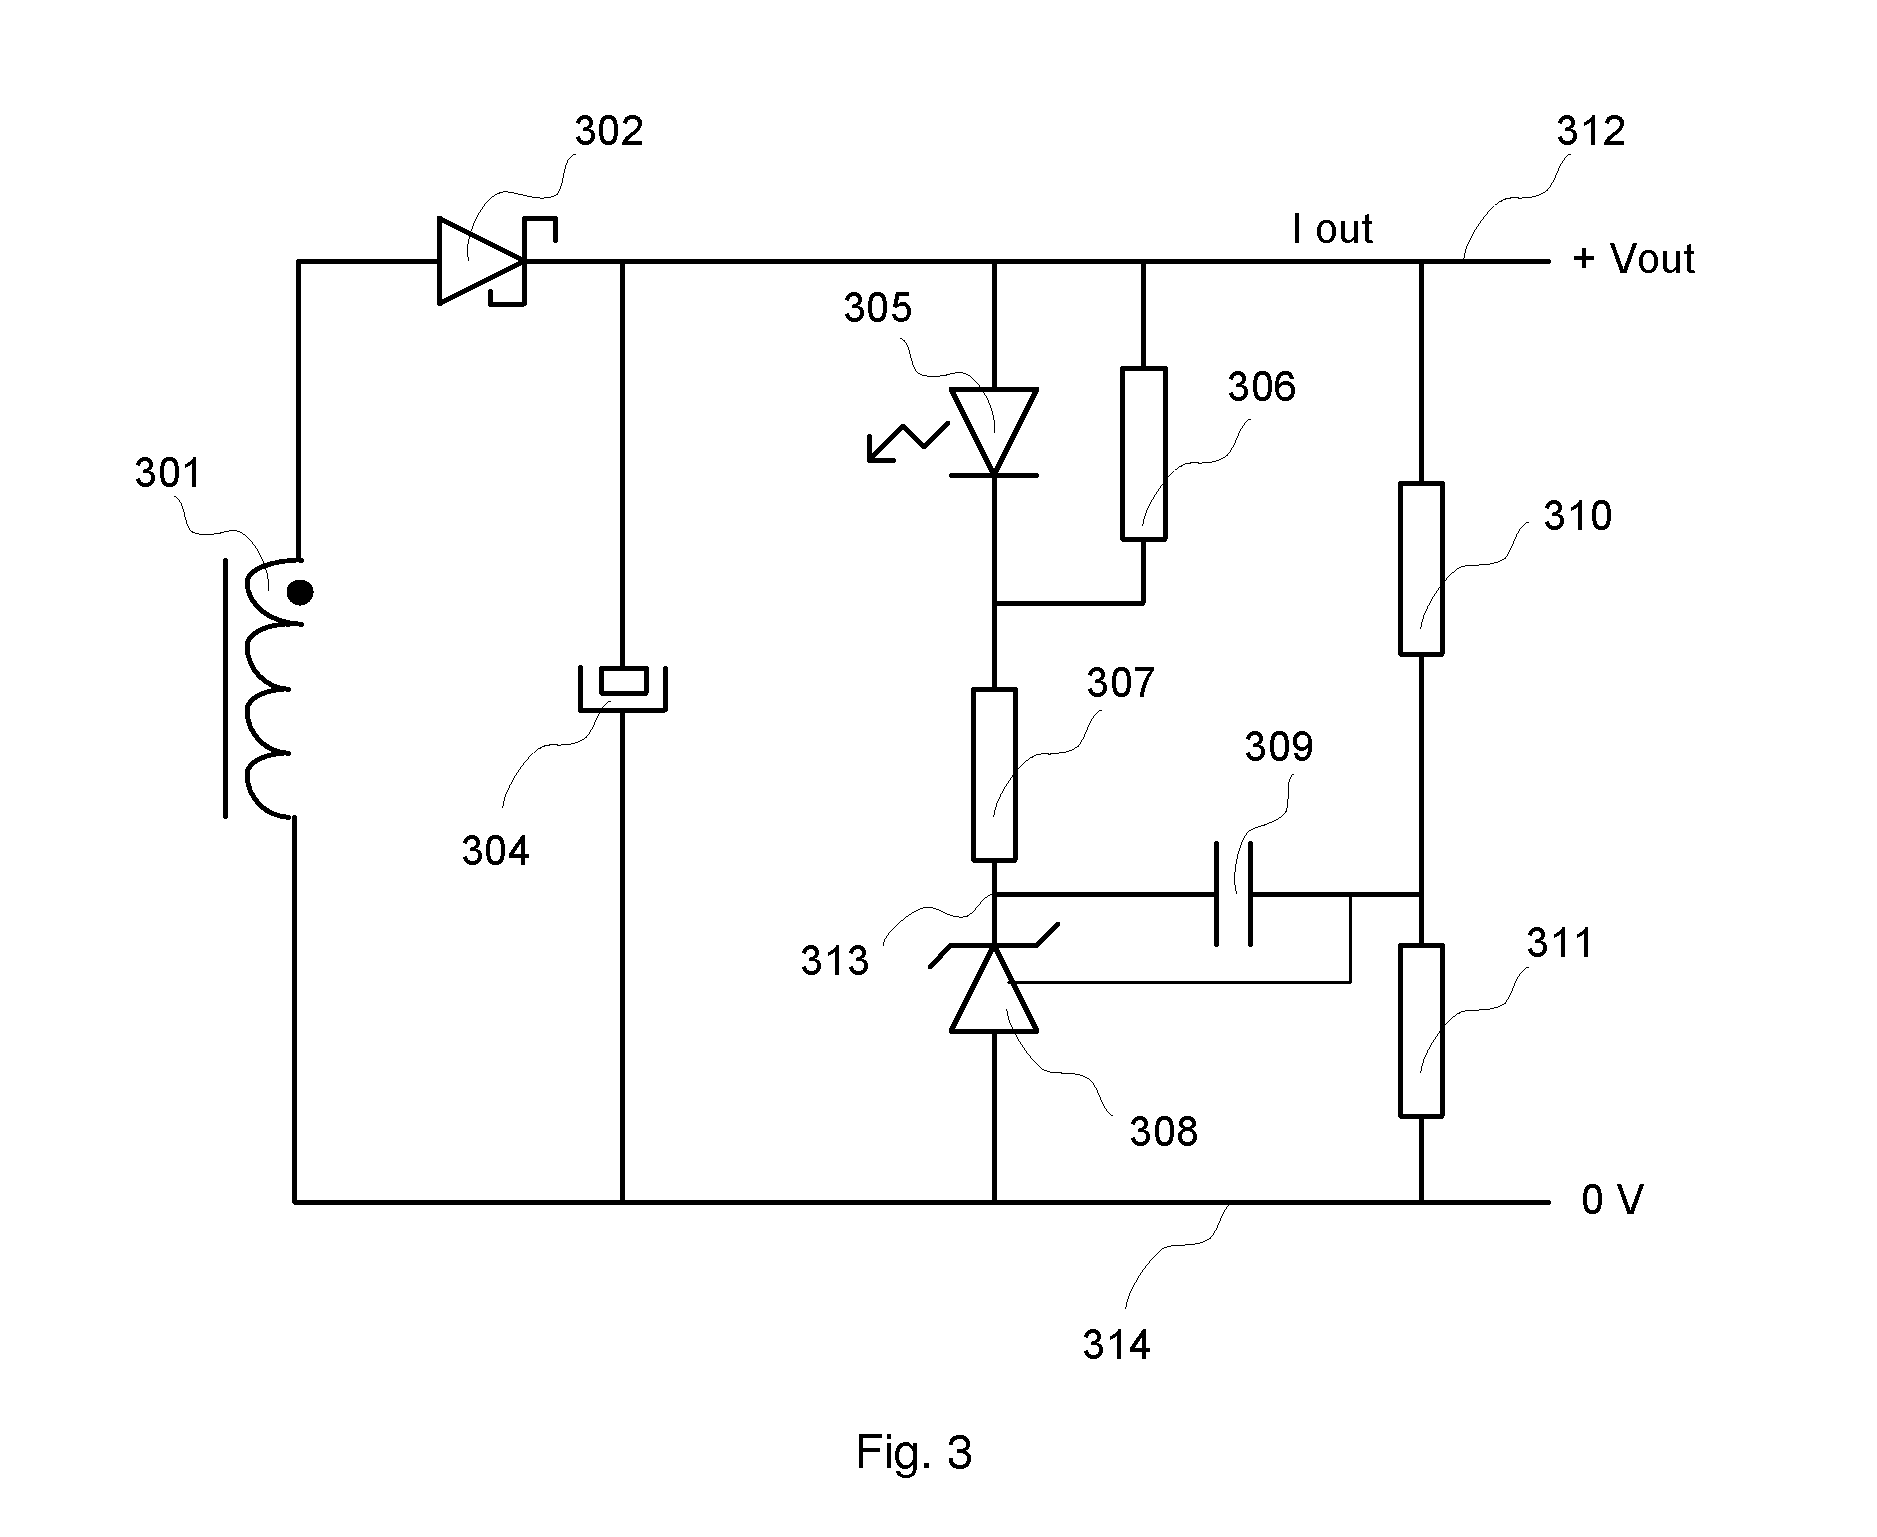 Switch mode power supply module and associated hiccup control method